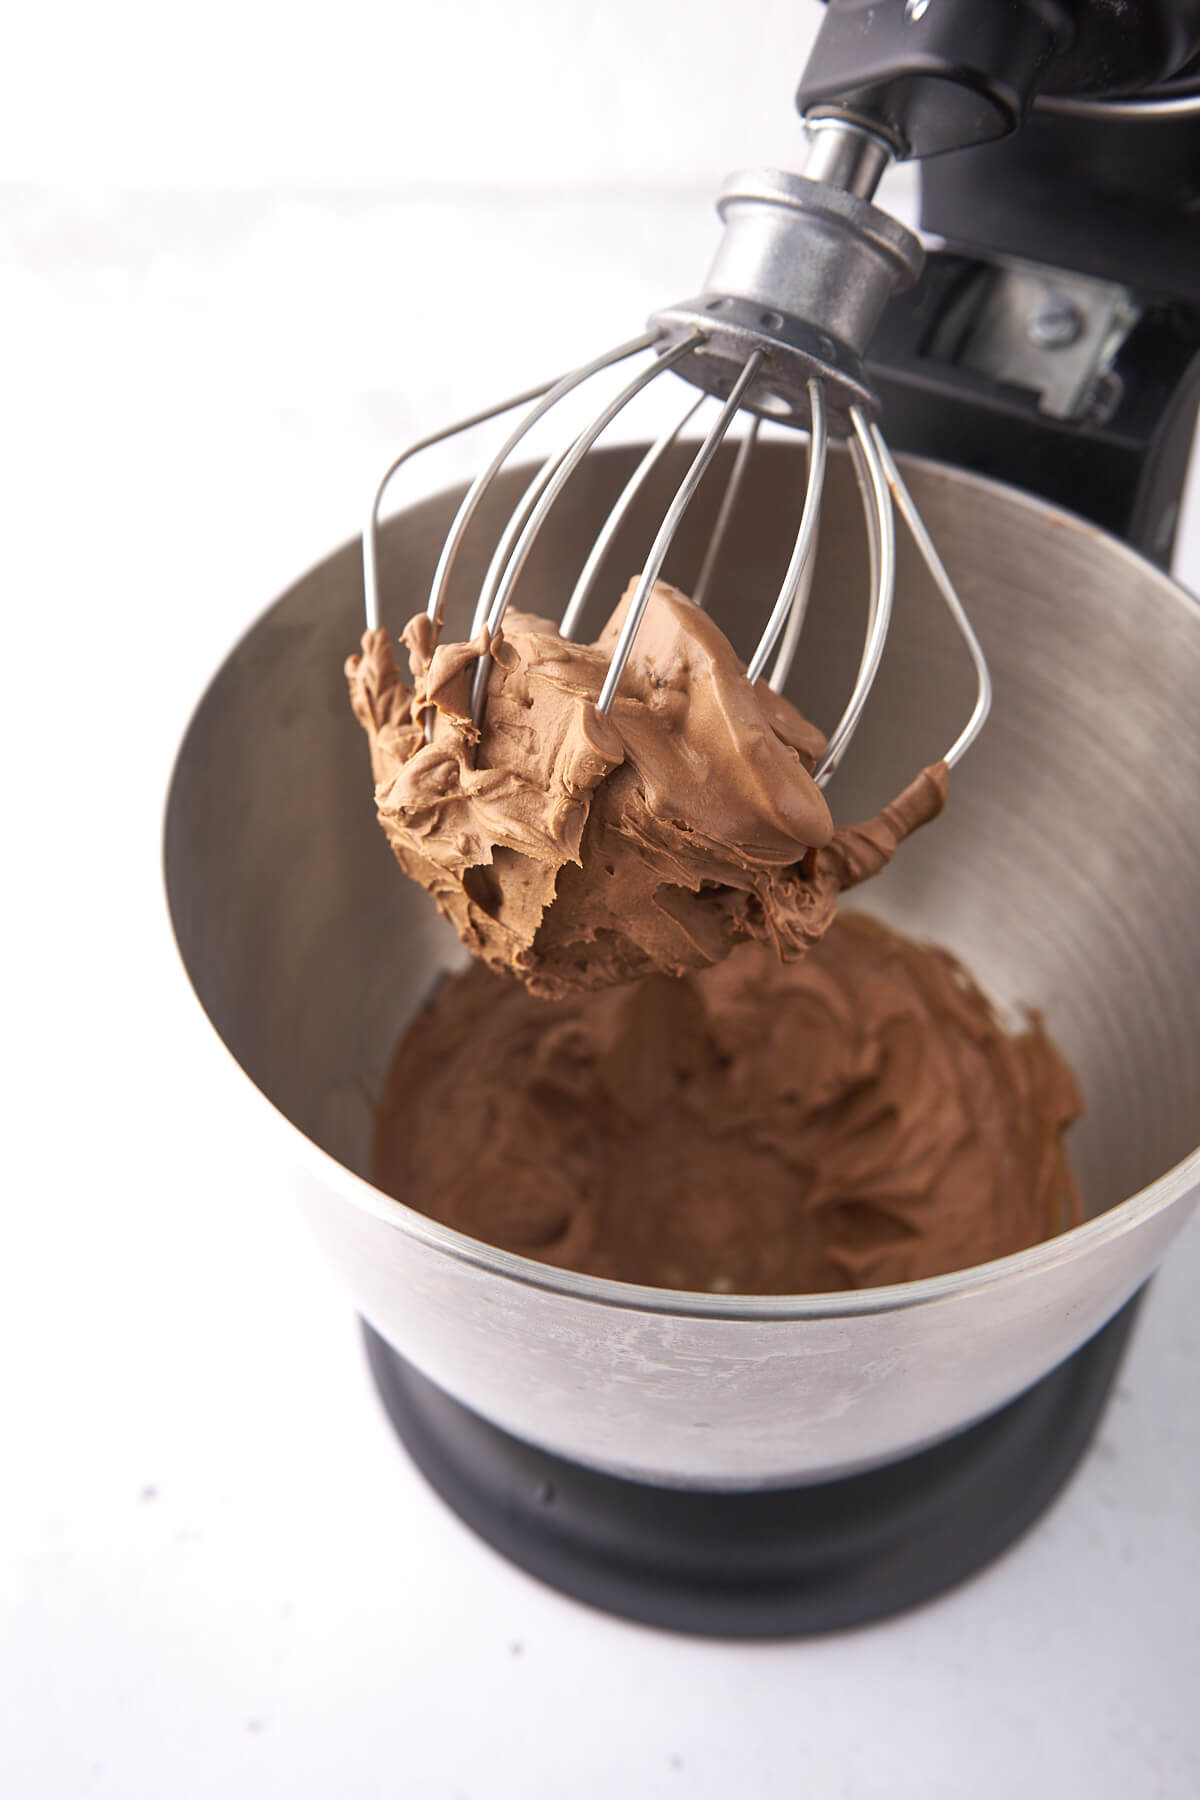 Chocolate frosting on the whisk of a stand mixer.